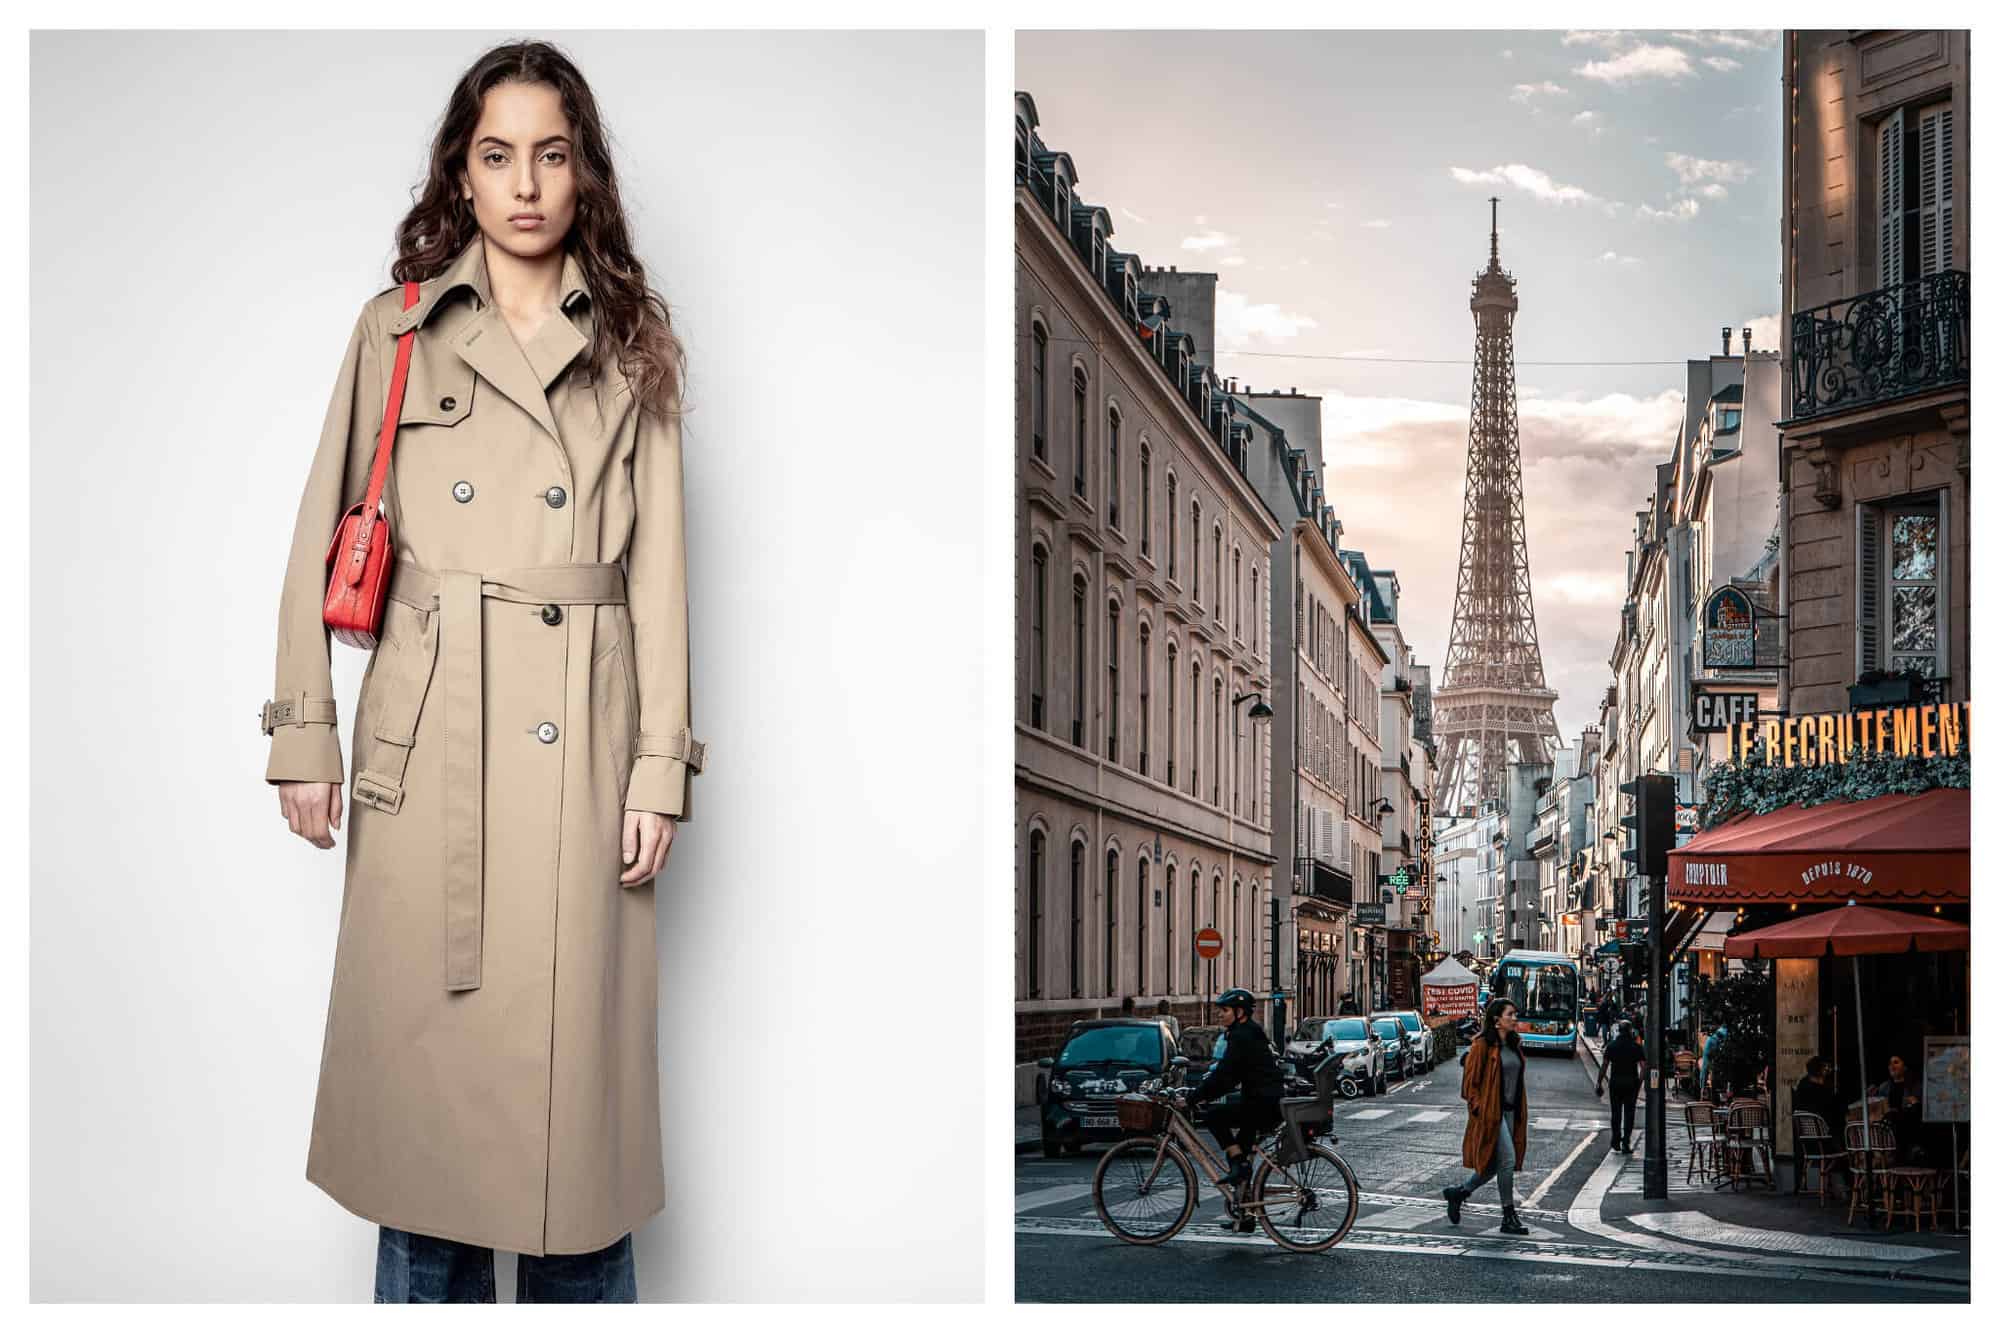 Left a photo of a model wearing a Zadig & Voltaire trench coat. Right: a photo of people crossing a street in paris with the Eiffel Tower in the background